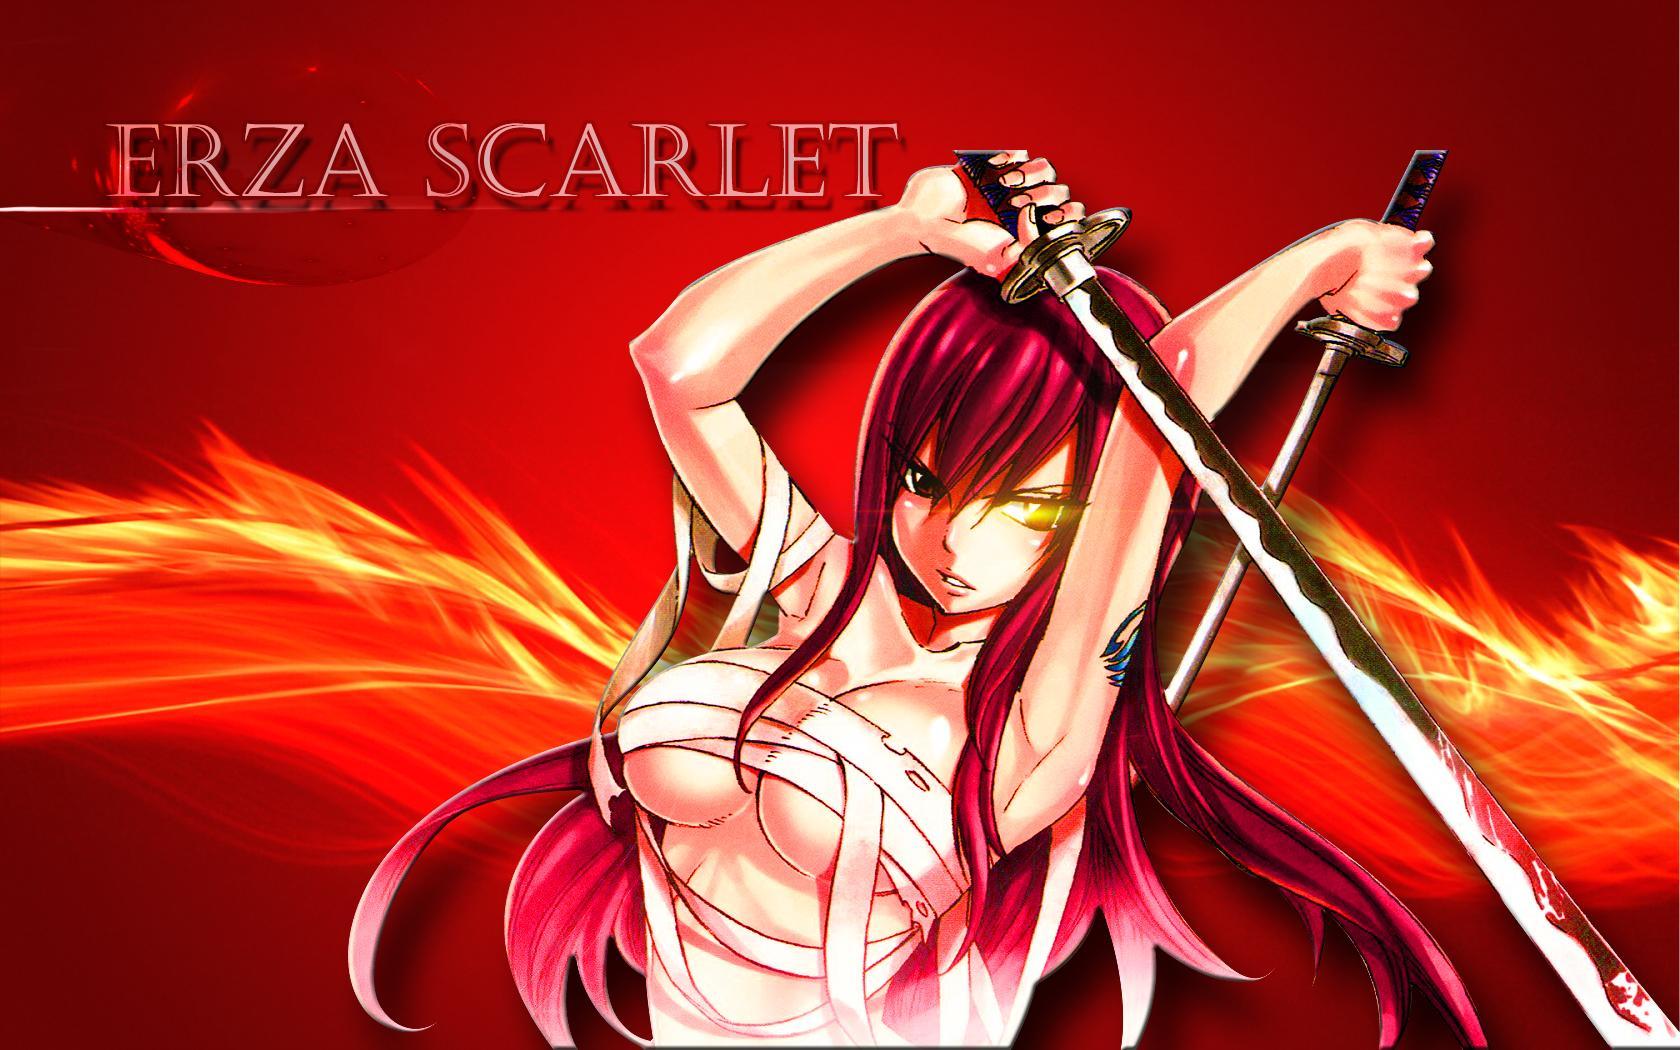 Erza Scarlet Wallpaper HD (Picture)